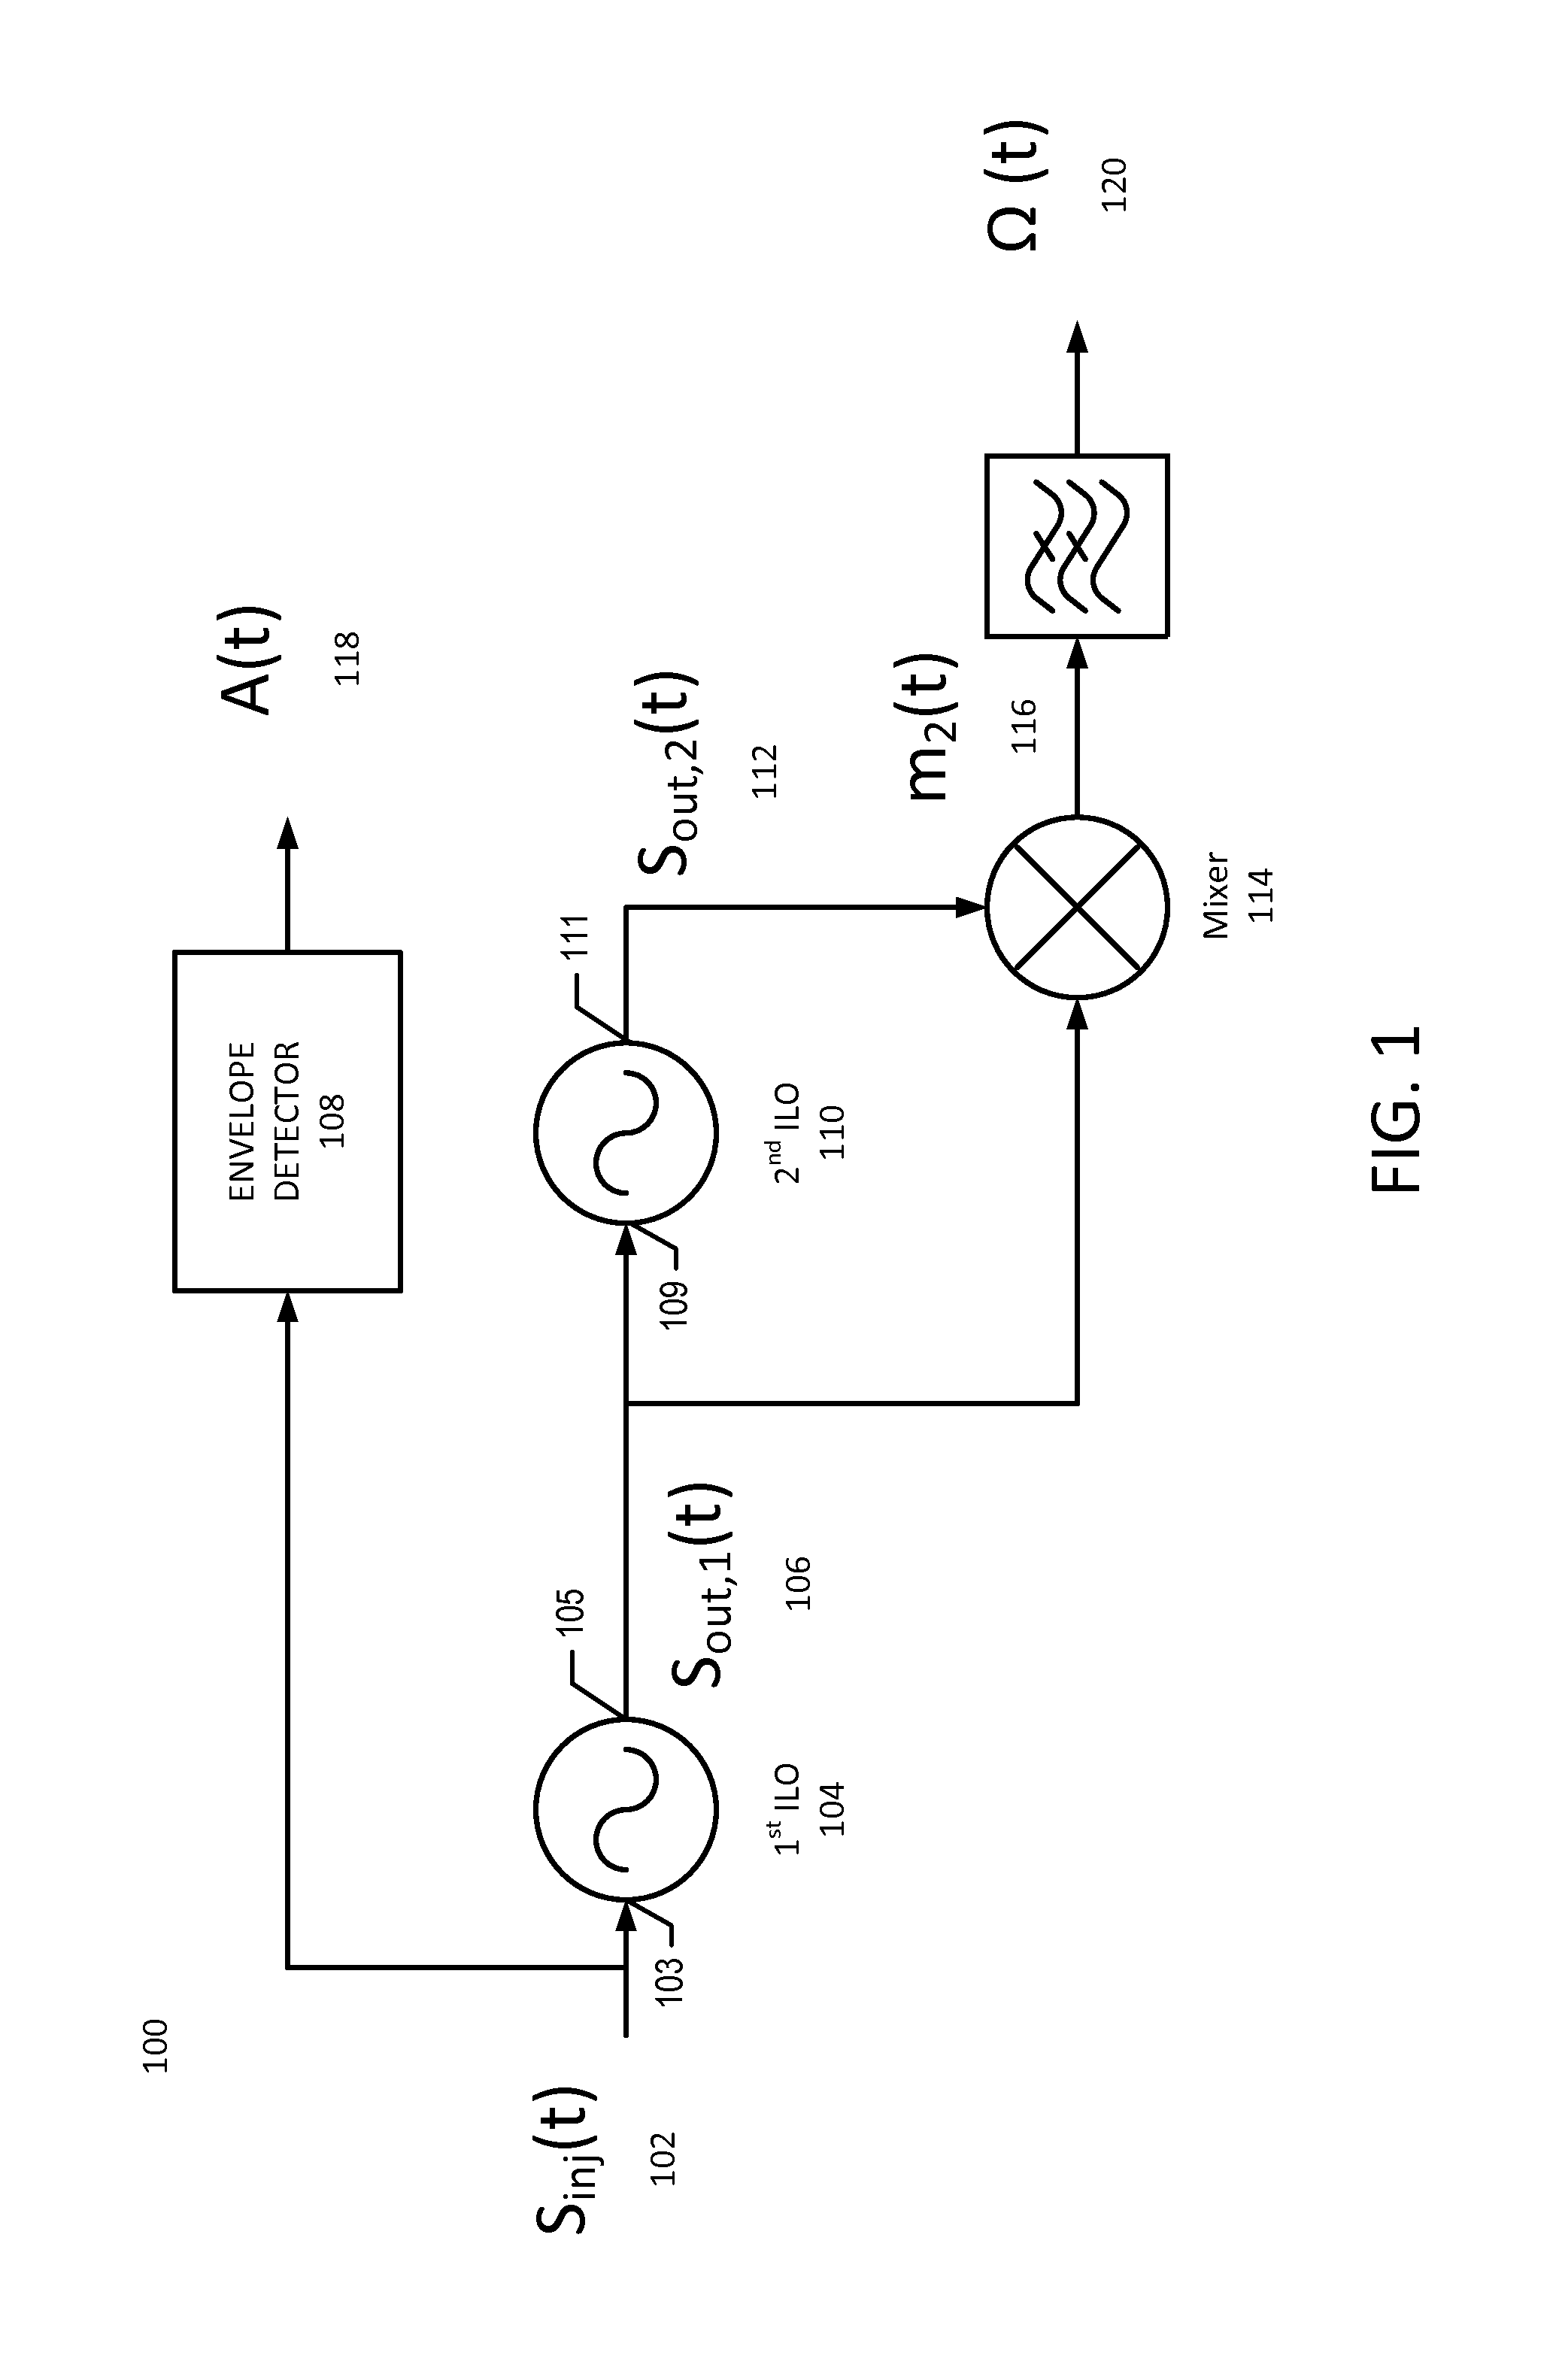 Polar receiver architecture and signal processing methods